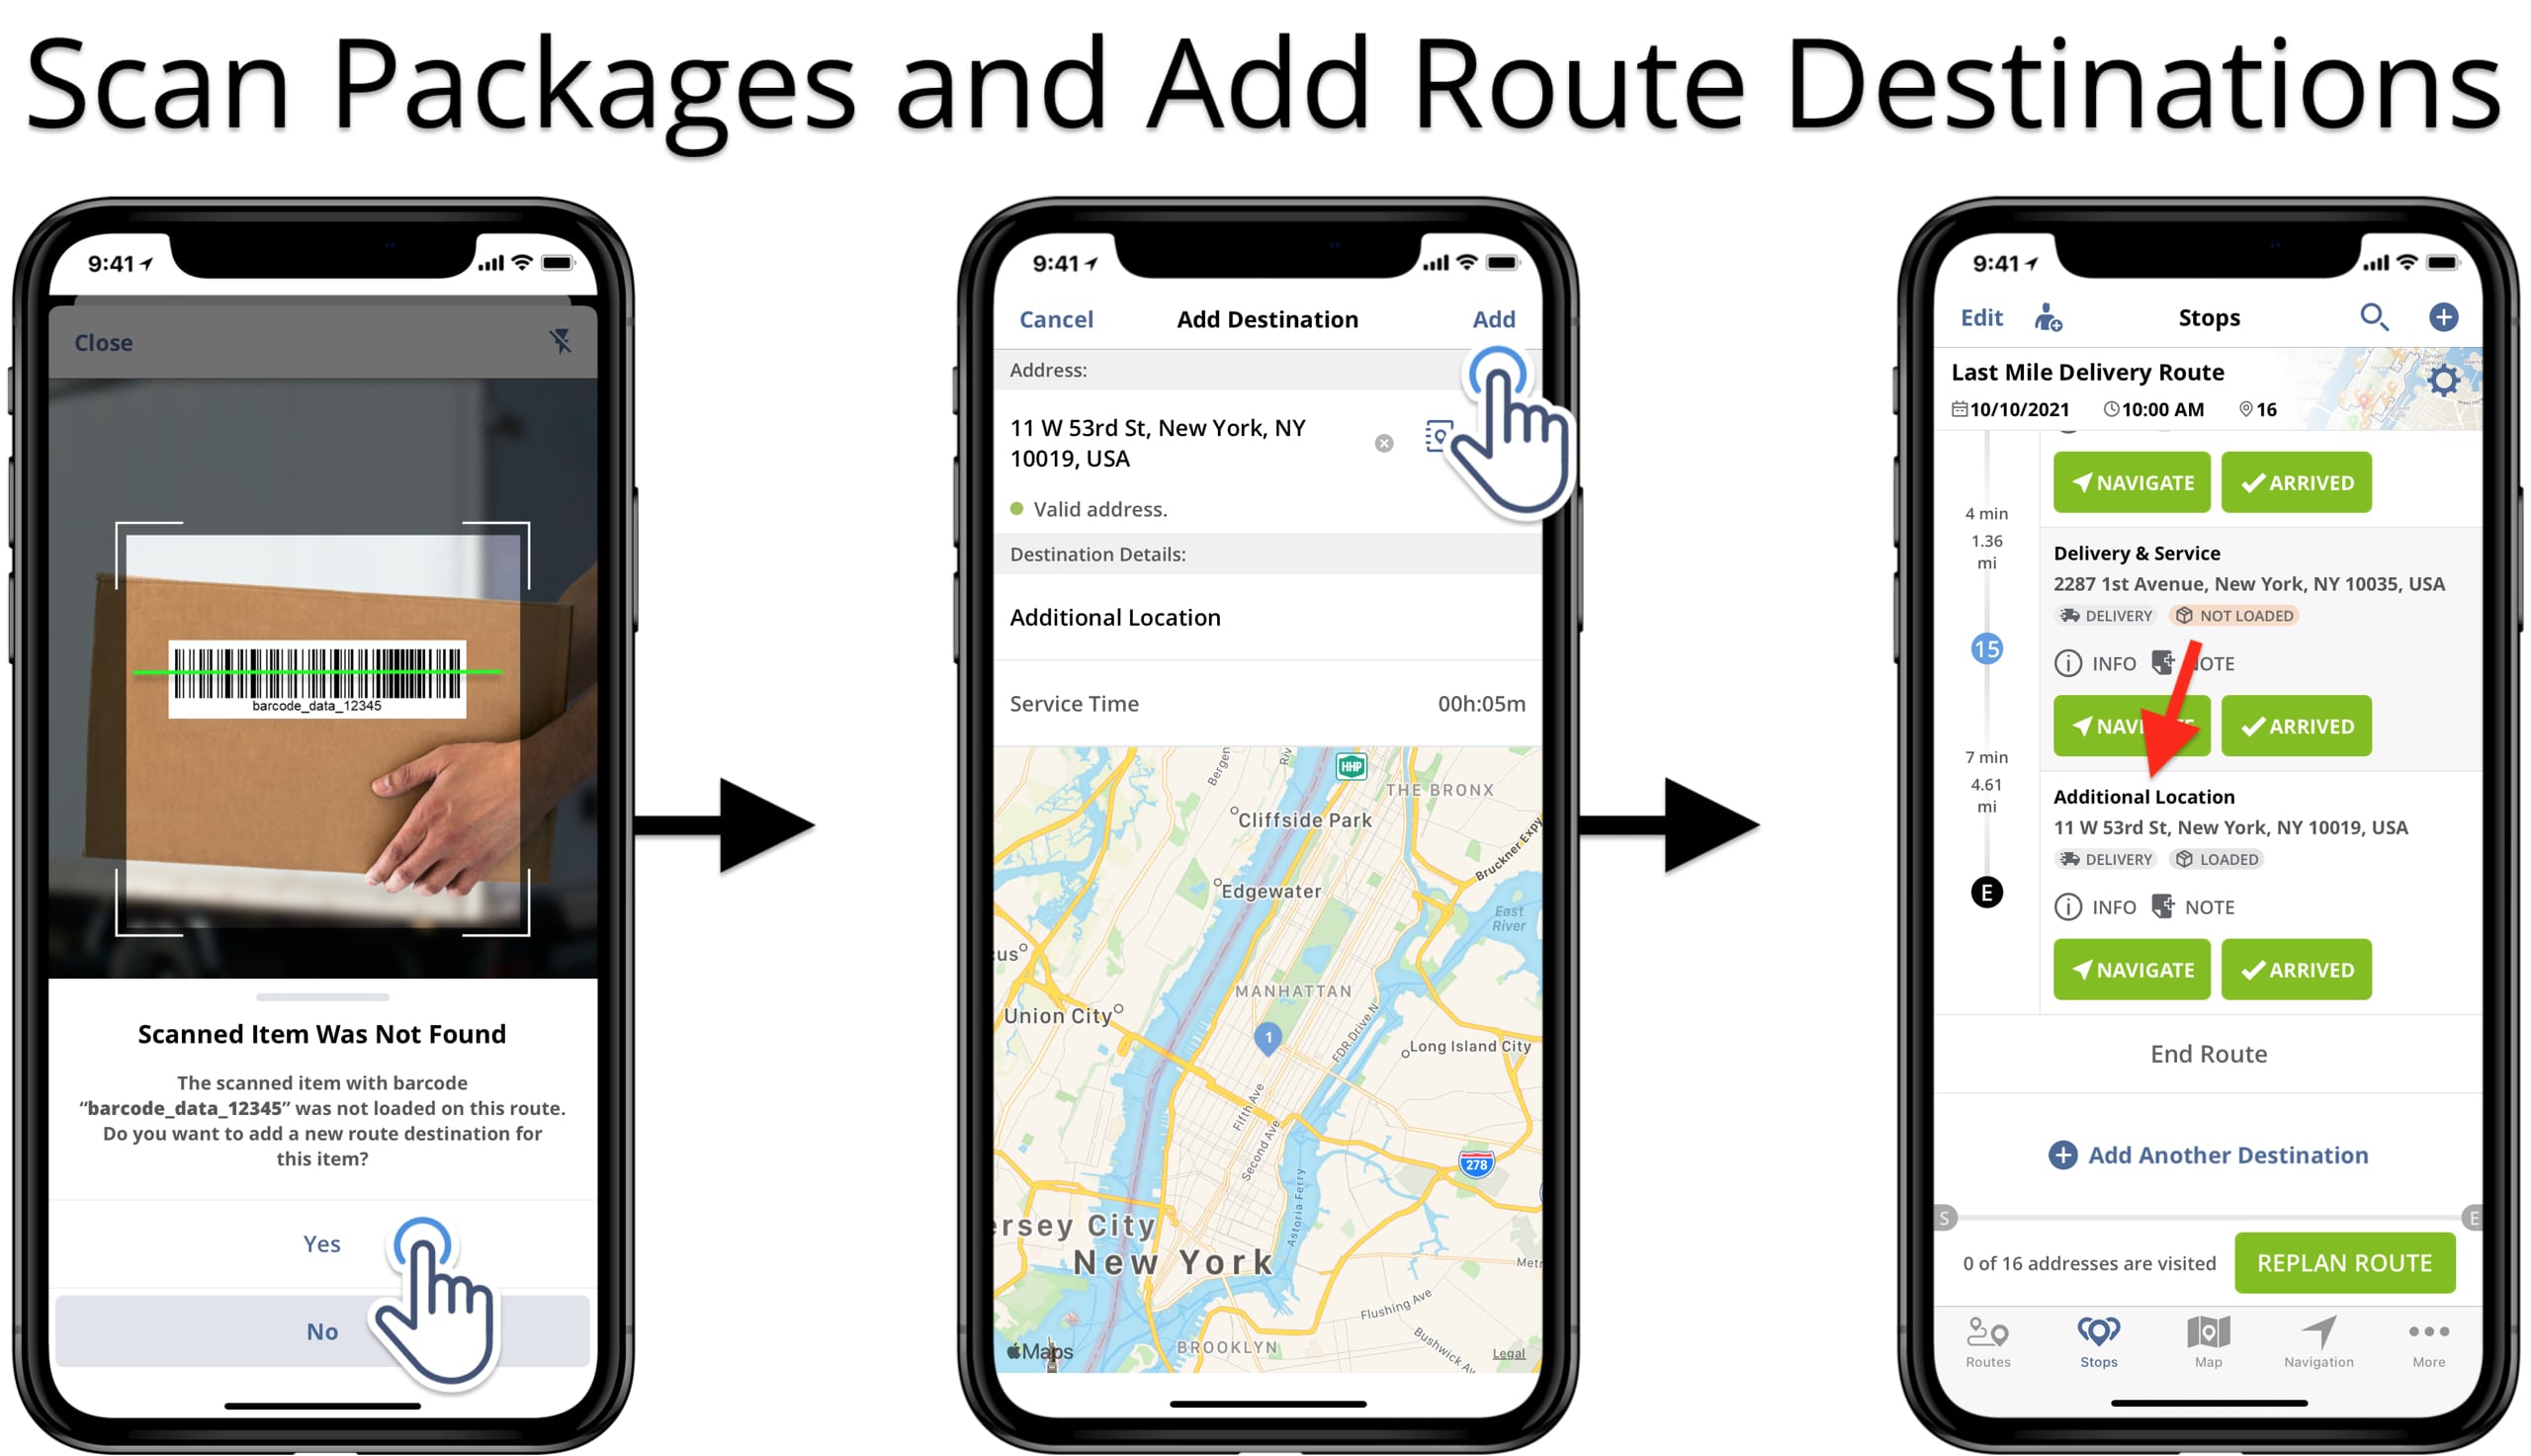 Add scanned and unidentified labels and items to the route as destinations on route planner app.